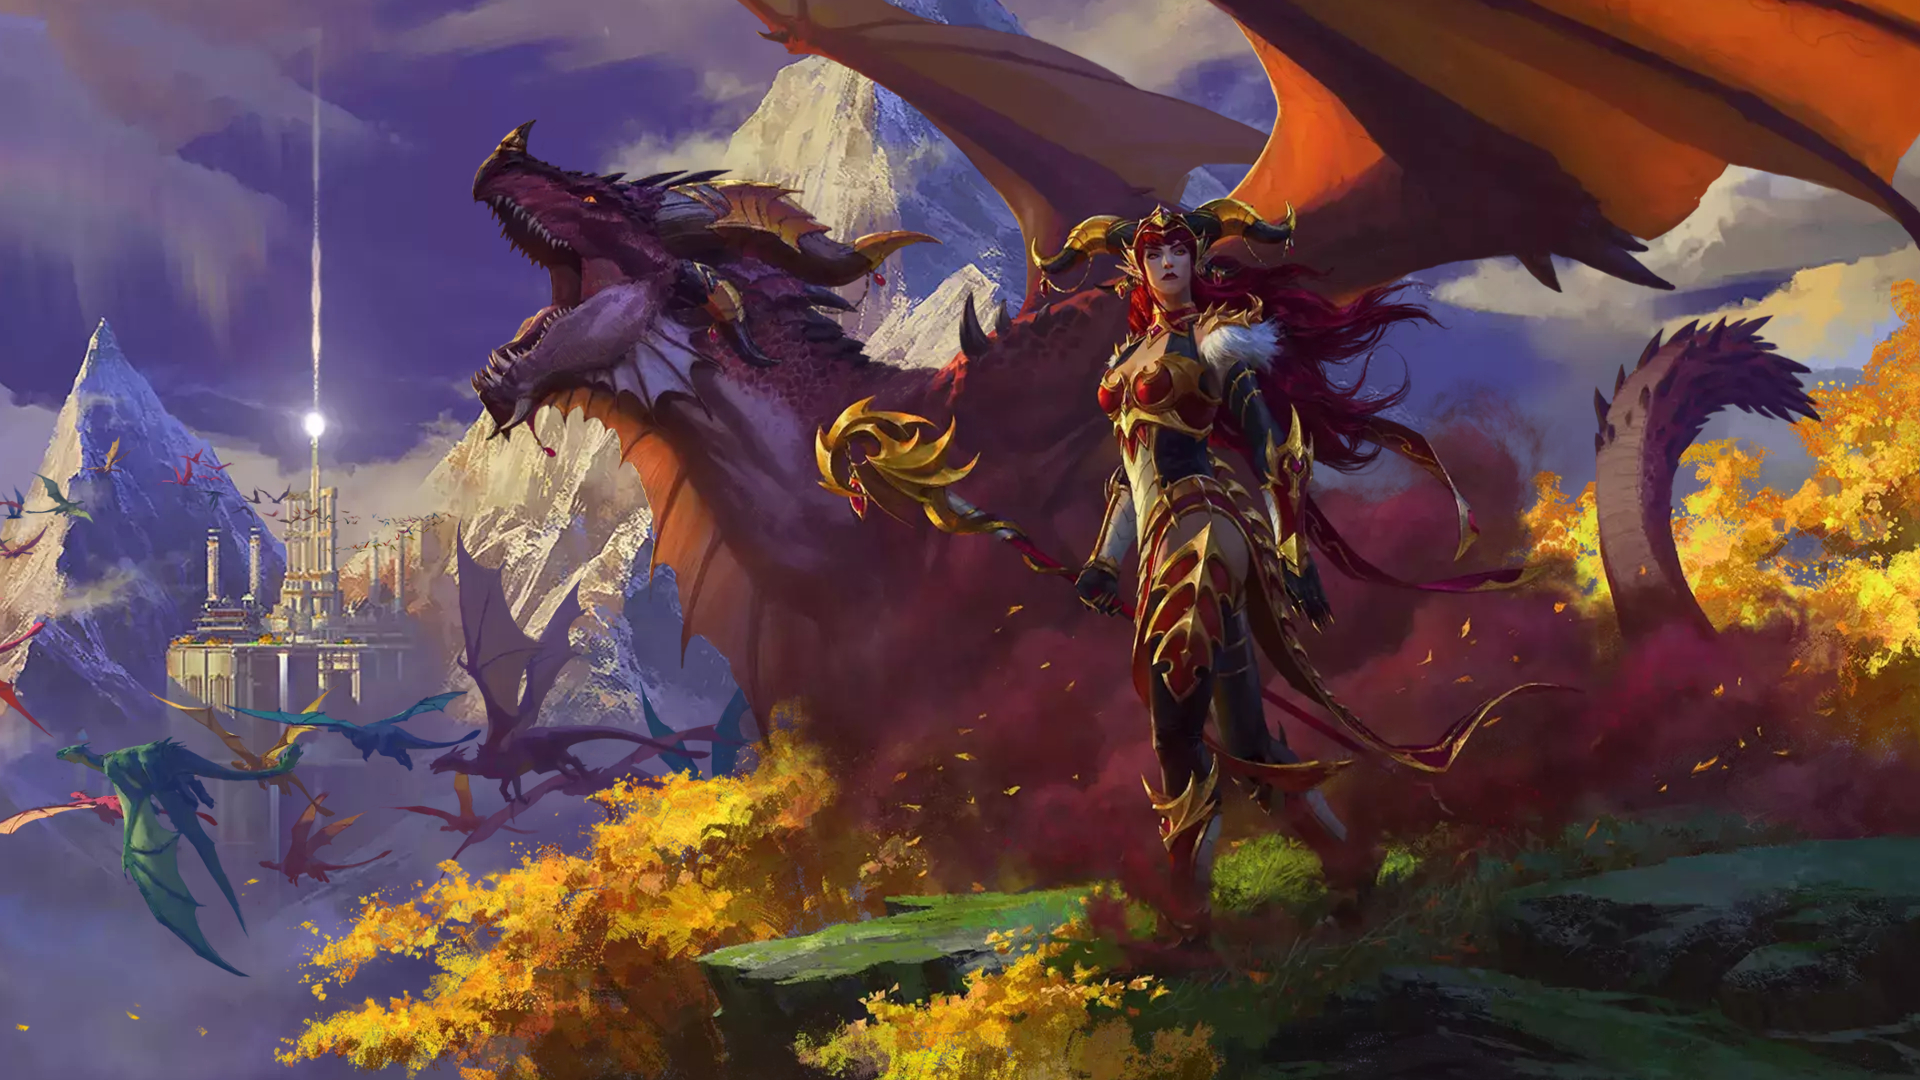 World of Warcraft: Dragonflight will launch in 2022.</br>Pre-order is open